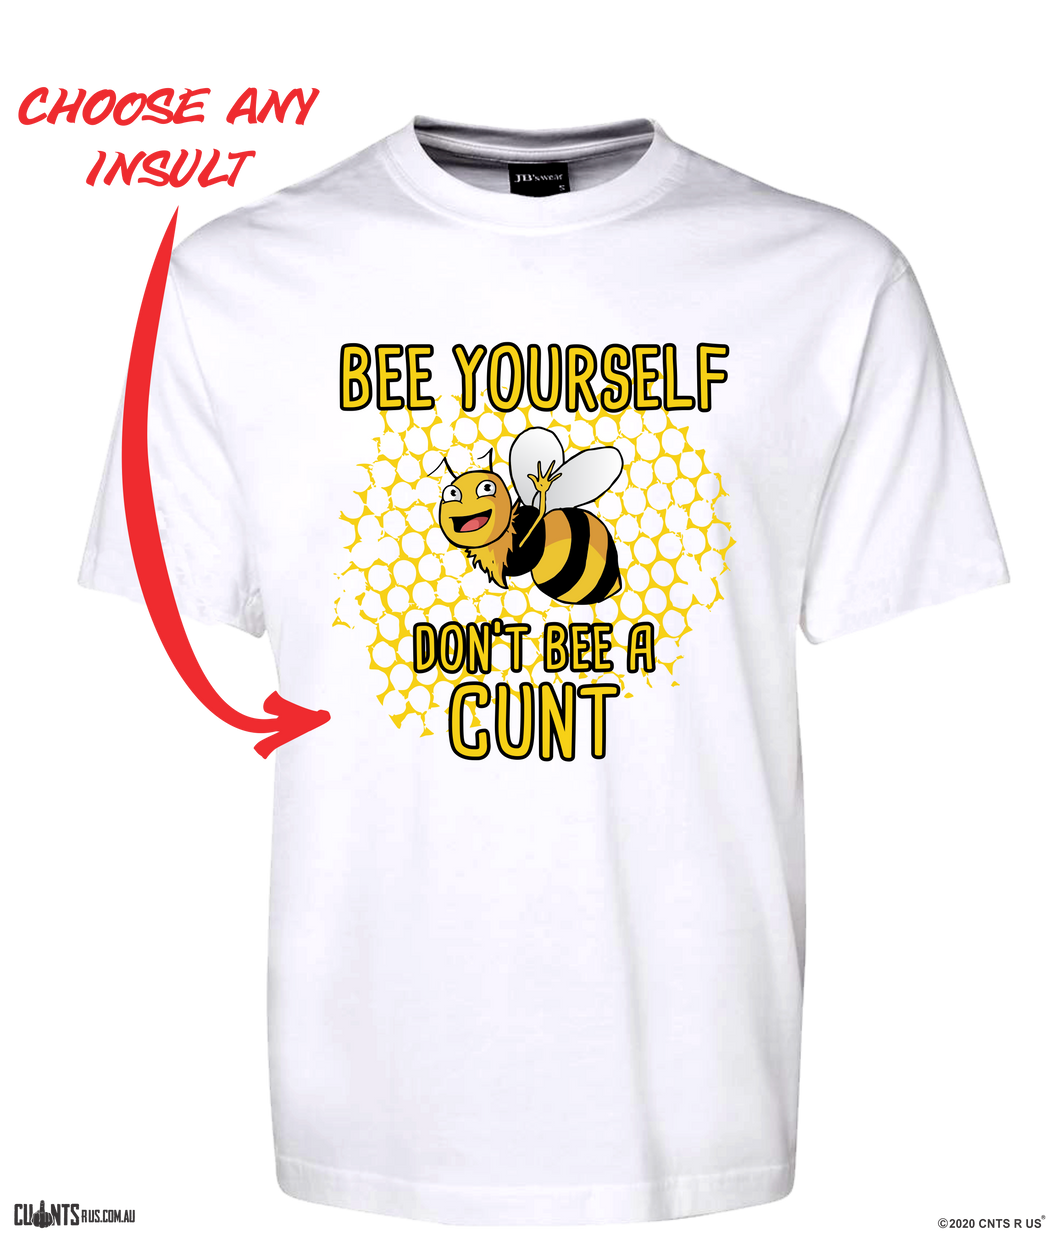 Bee Yourself Don't Bee A Cunt T-Shirt Adult Tee CRU01-1HT-24016